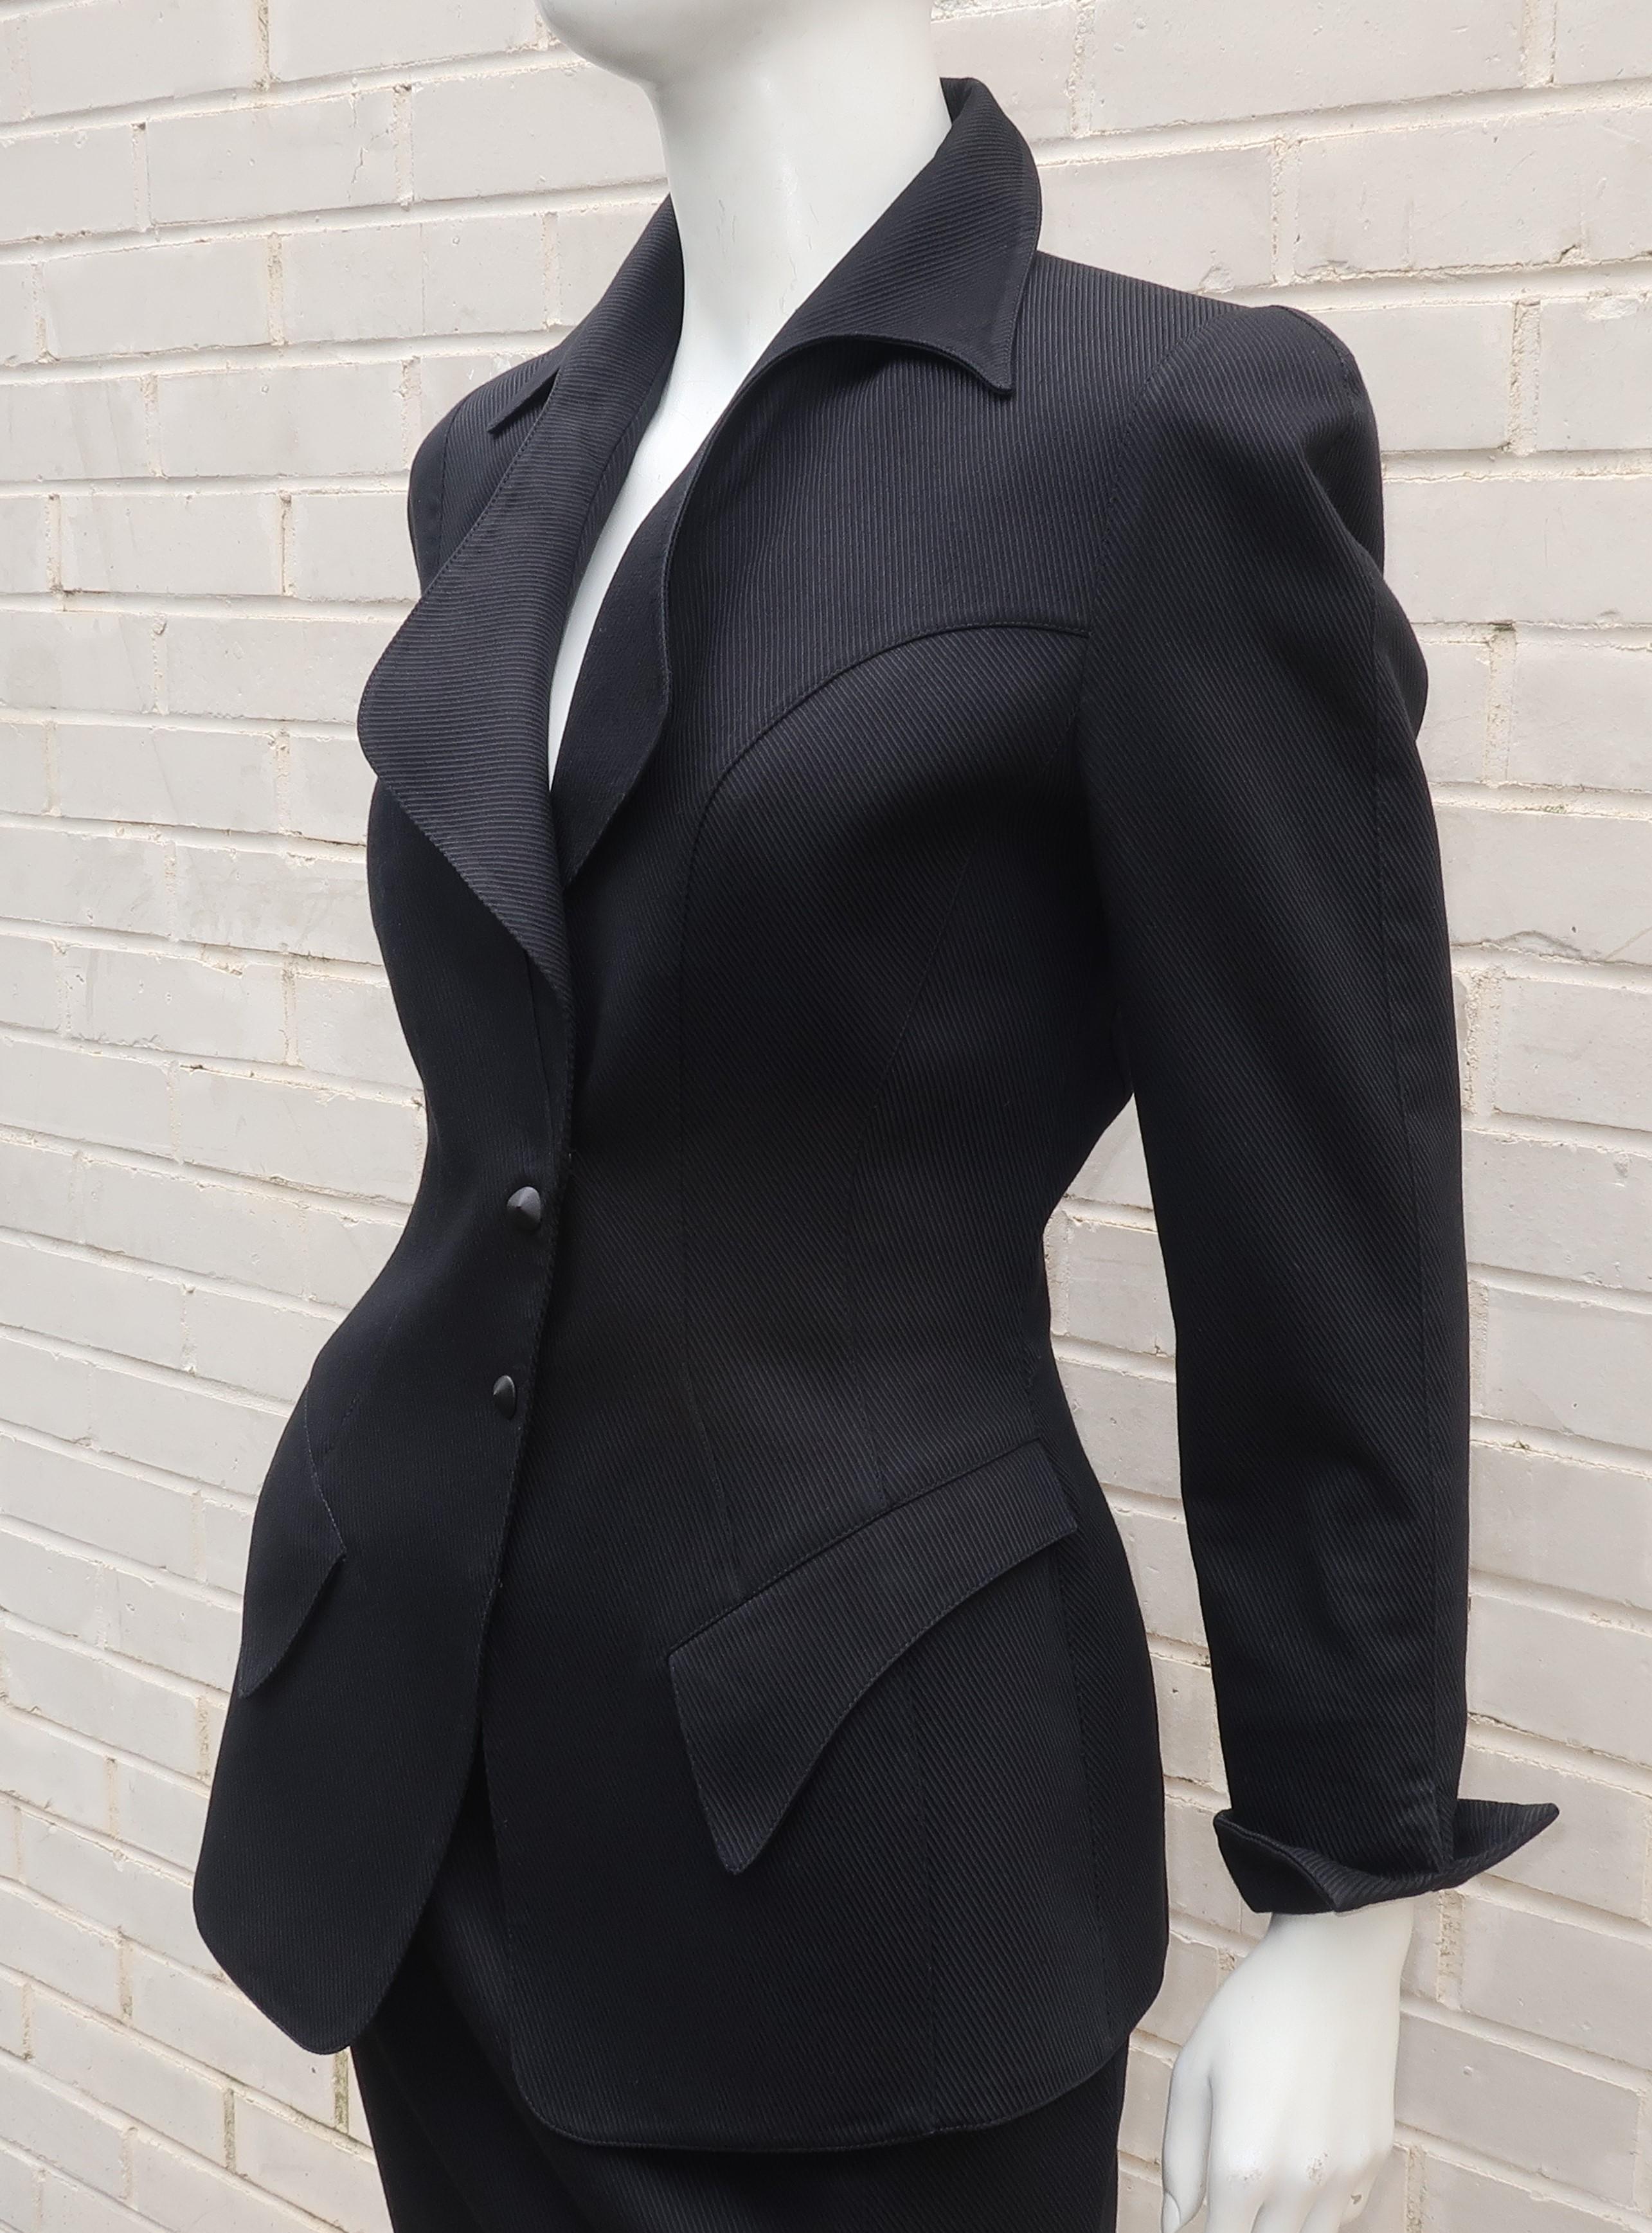 Thierry Mugler warm weather weight black cotton skirt suit with a ribbed texture.  The jacket snaps at the front with faux closures and offers Mr. Mugler's iconic sculptural silhouette with a stylized pointy collar, pockets, upturned cuffs and a